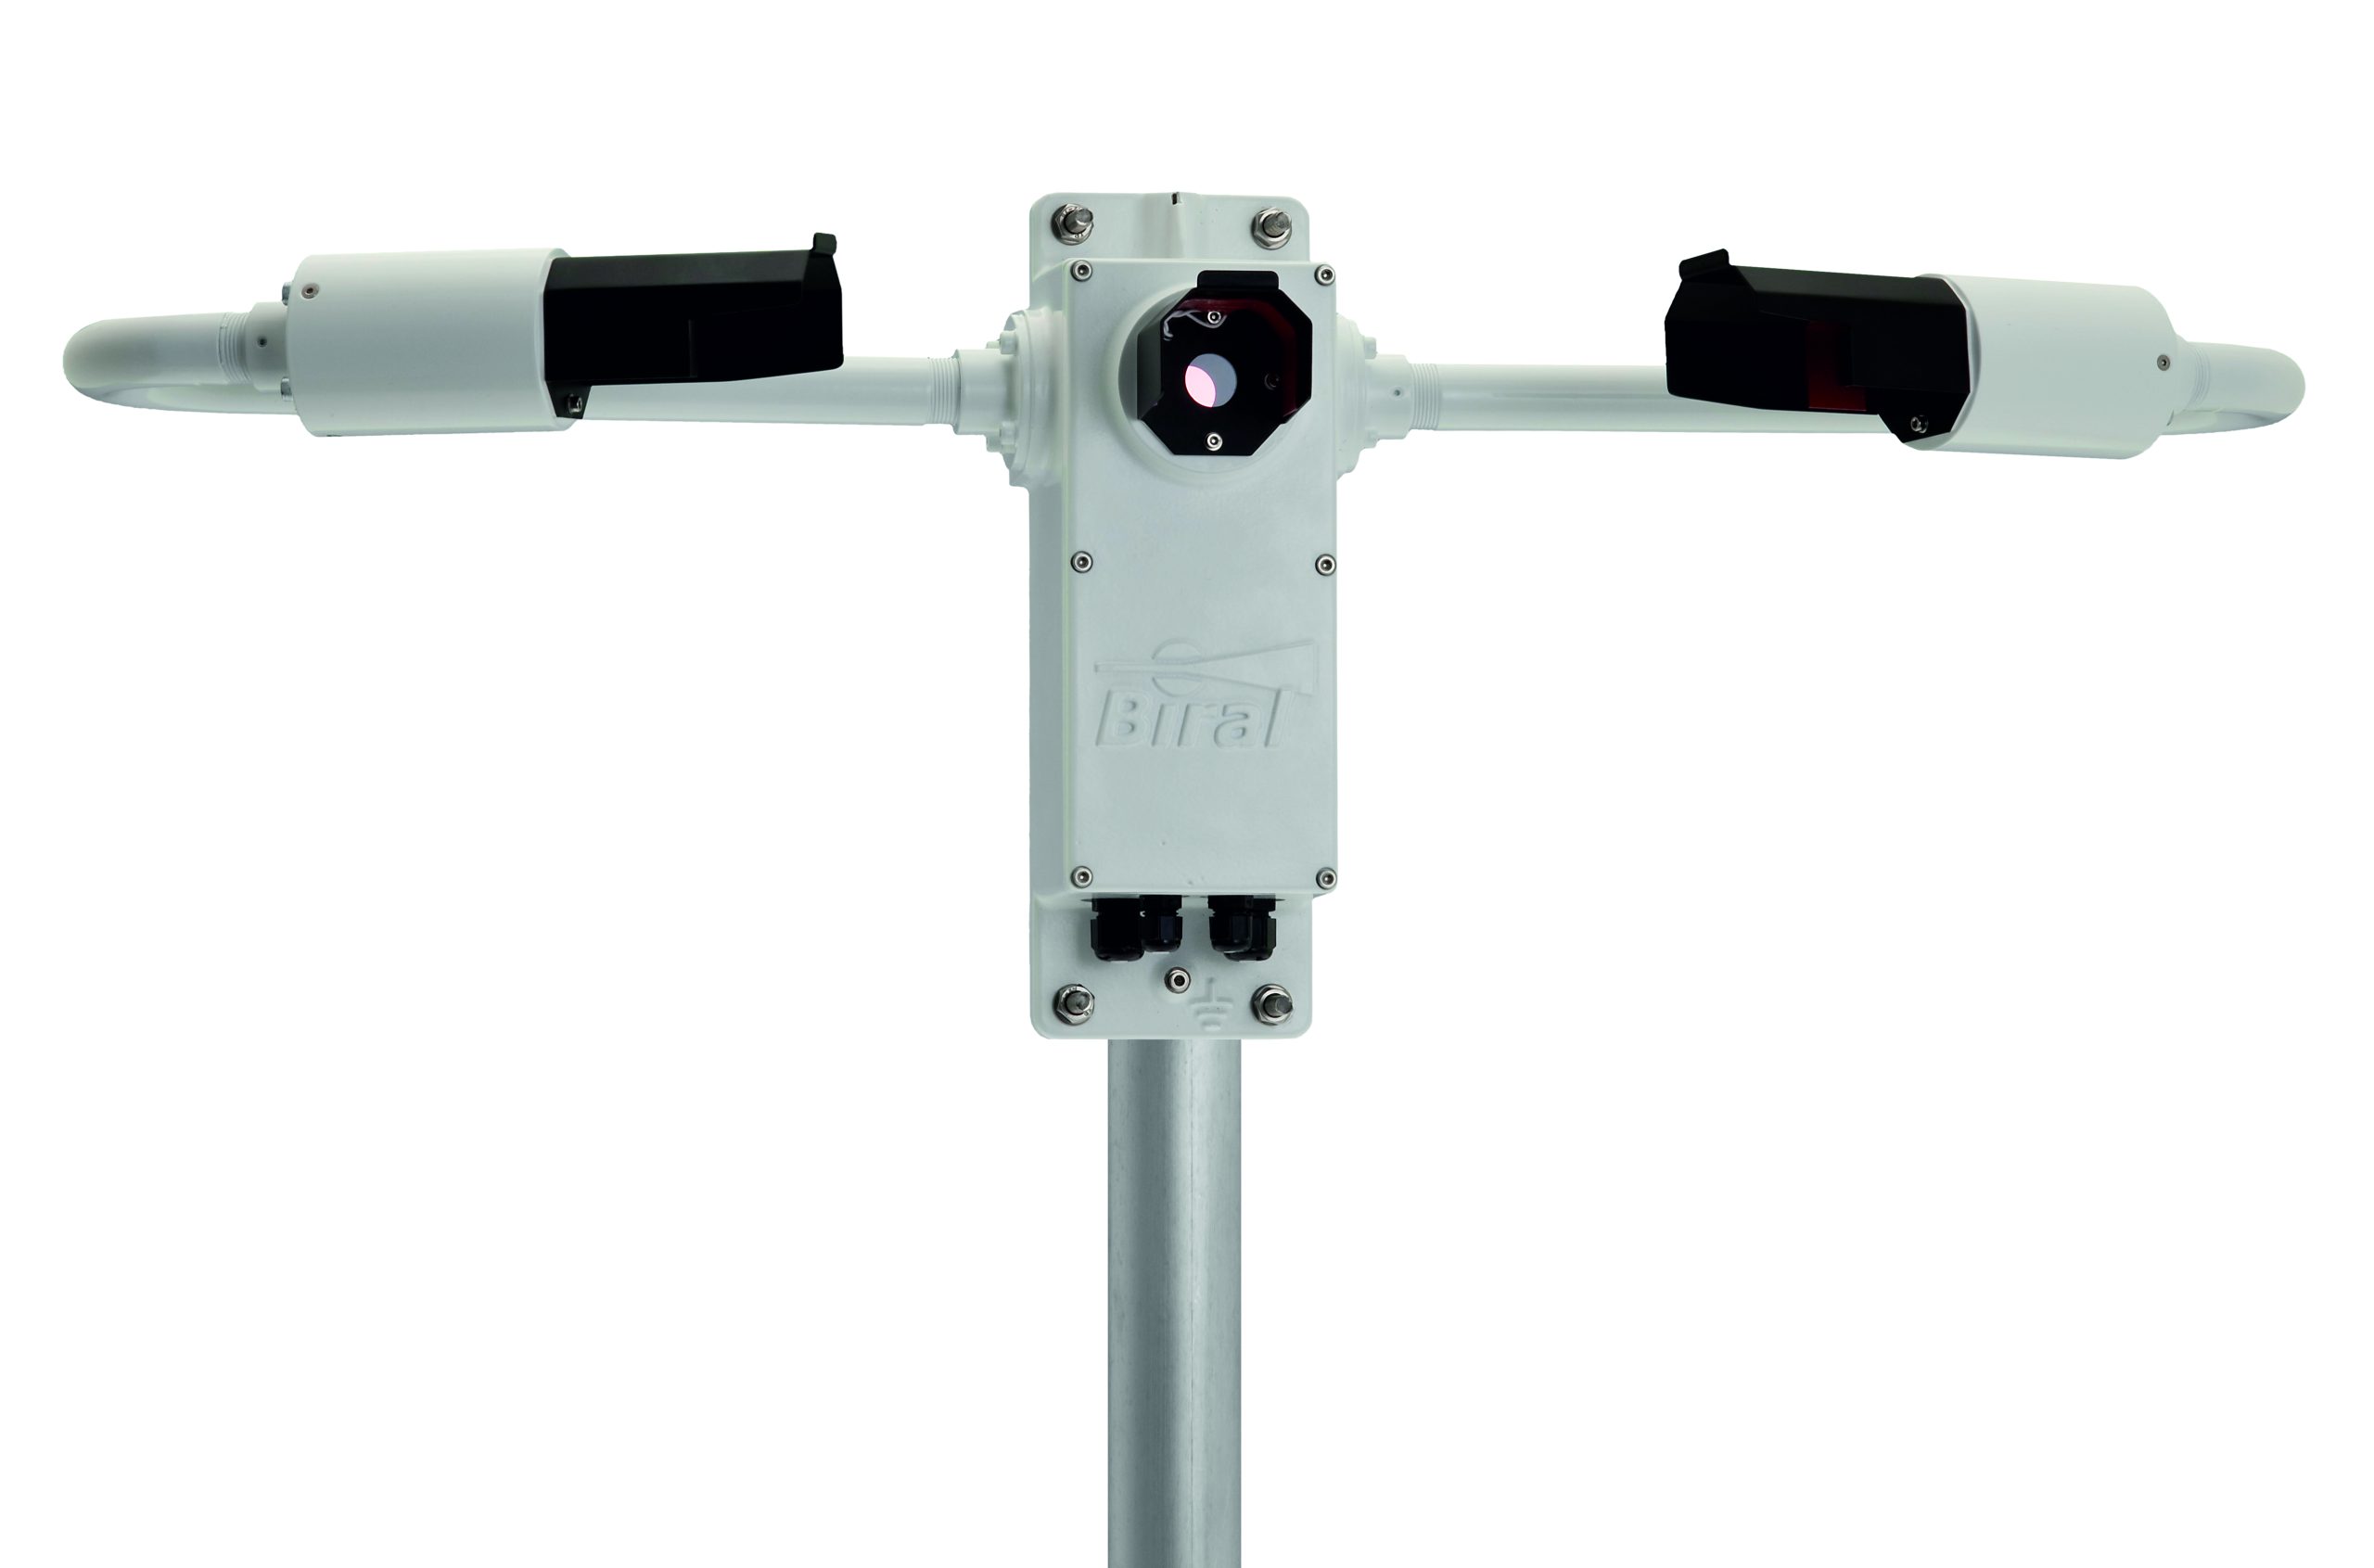 Biral Visibility and Present Weather Sensors